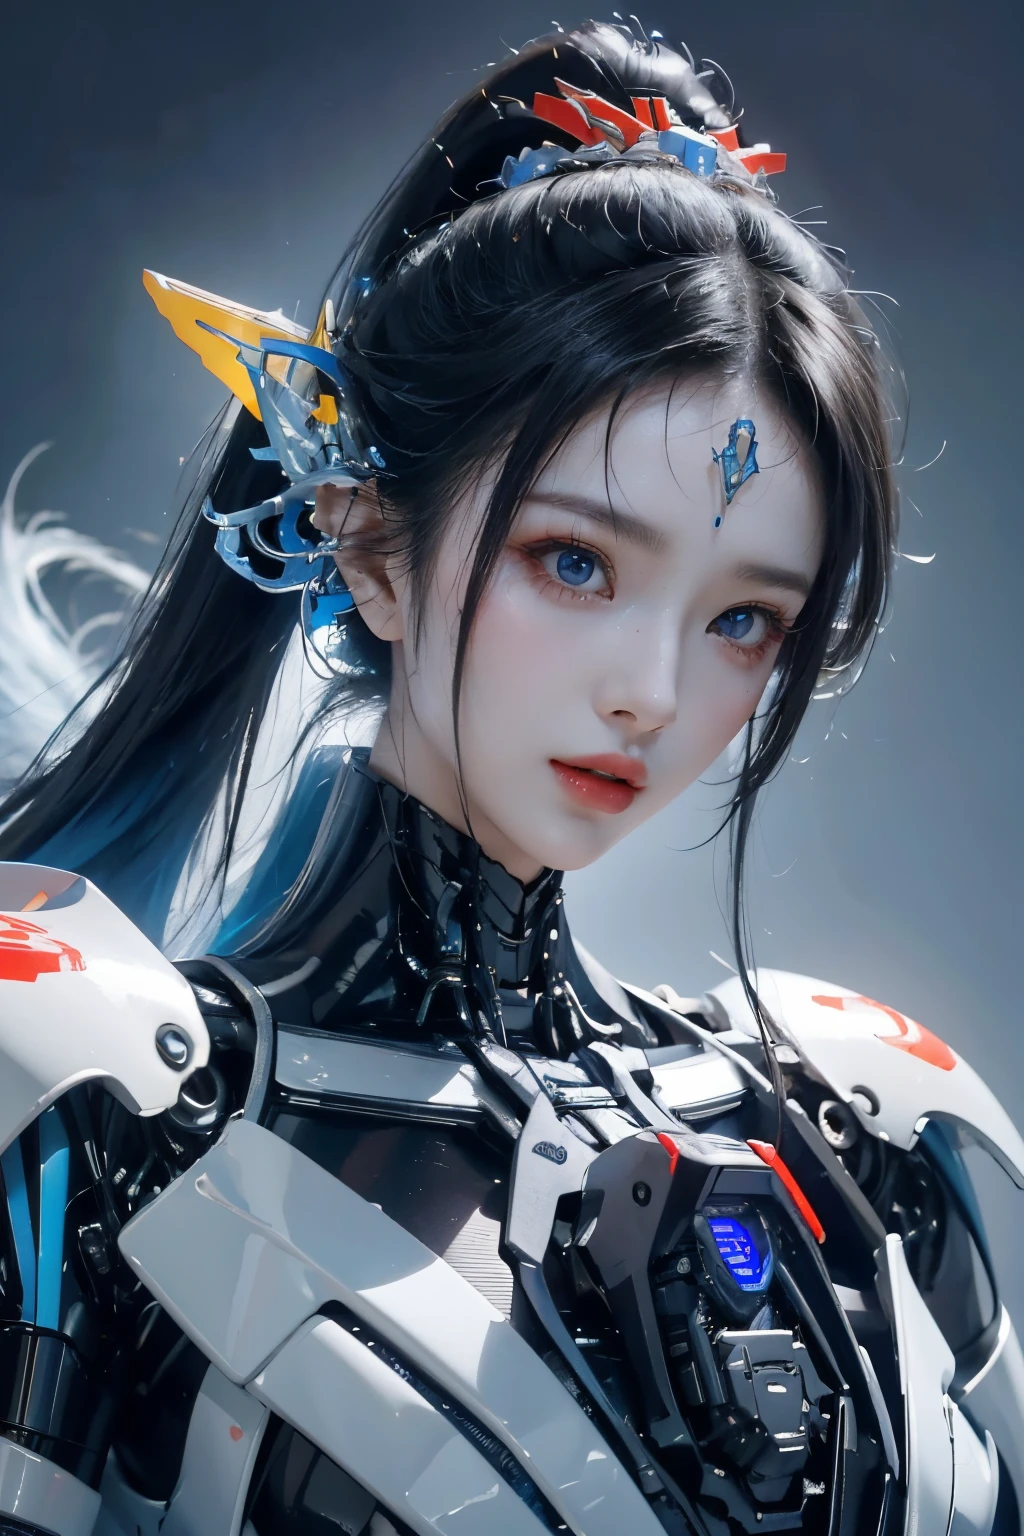 tmasterpiece,Best quality at best,A high resolution,8K,(portrait),(Close up of avatar),(RAW photogr),real photograph,digital photography,(cyberpunk queen),20-year-old girl,long ponytail hairstyle,By bangs,(Black and blue gradient hair),(Glowing red eyes),Devil Eyes,Serious and charming,Mechanical body,Blue glowing electronic components,Red wires and tubes connect the body,Complex golden electronic texture,Weird technology symbols,Green round forehead symbol,Luxurious mechanical crown,Keep your mouth shut,(Mechanical Woman),Photo pose,cyber punk perssonage,Future Style,gray world background,oc render reflection texture